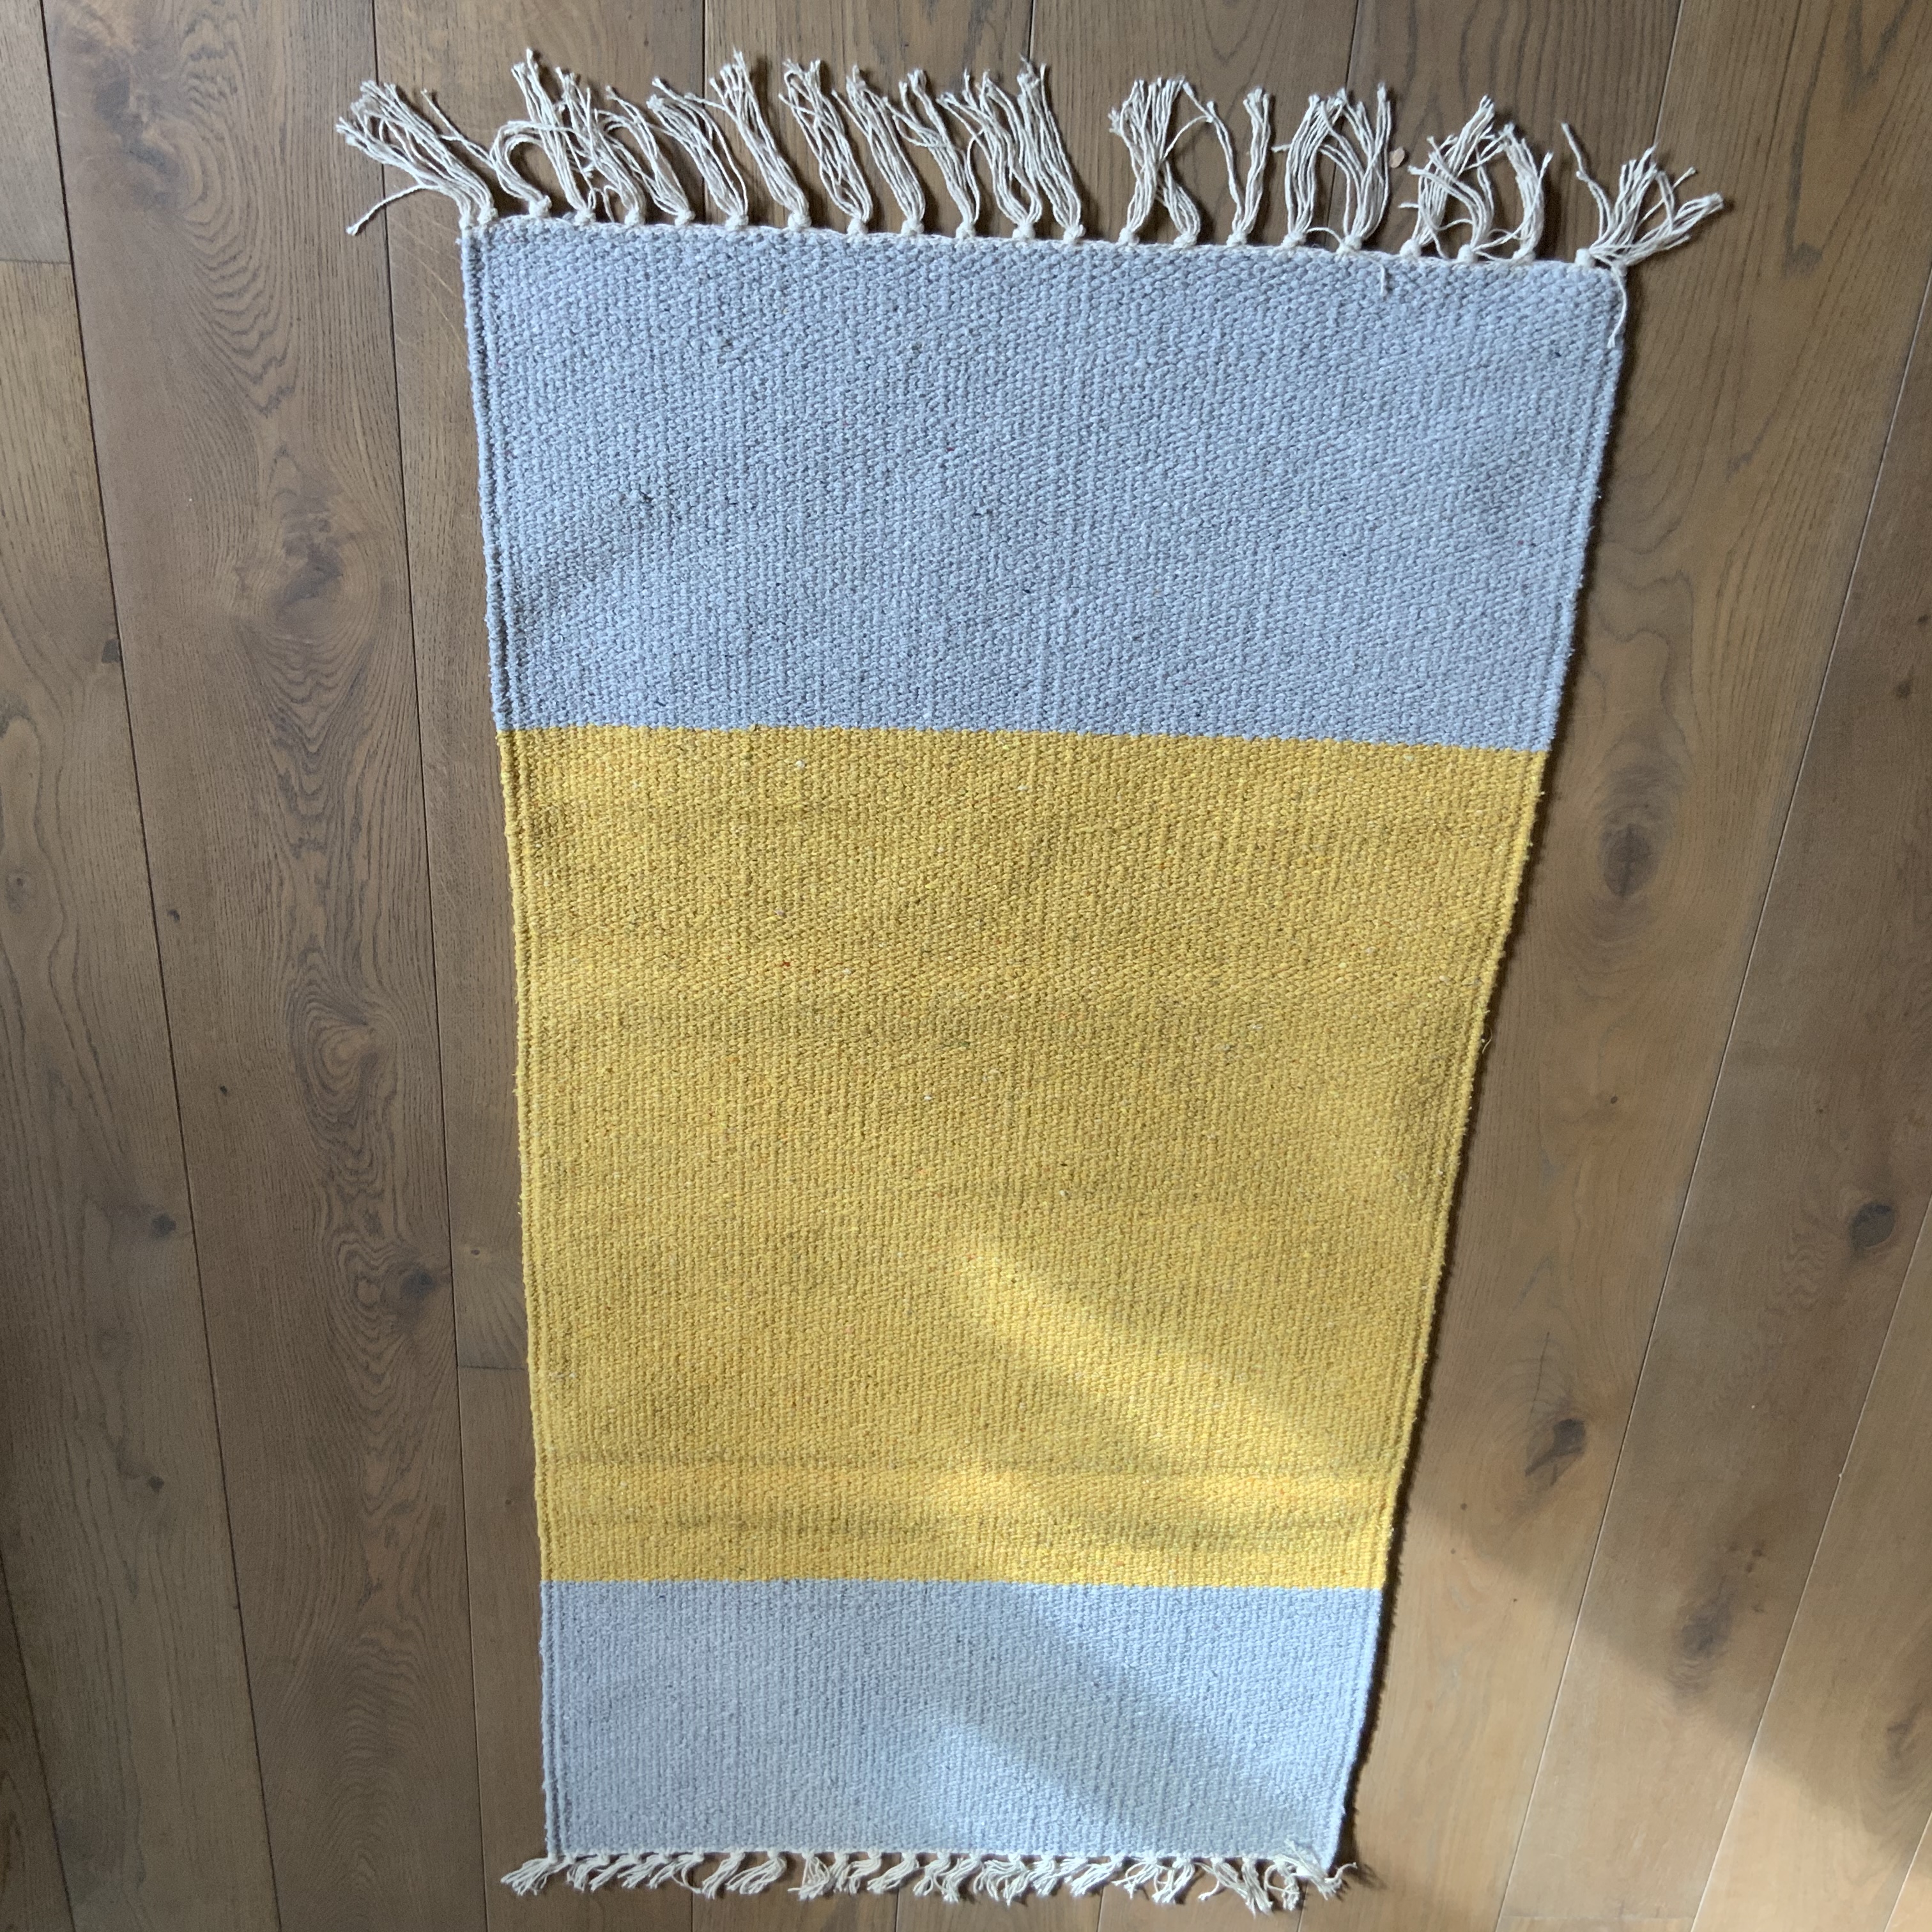 Bill & Edna Grey with yellow stripe eco cotton runner